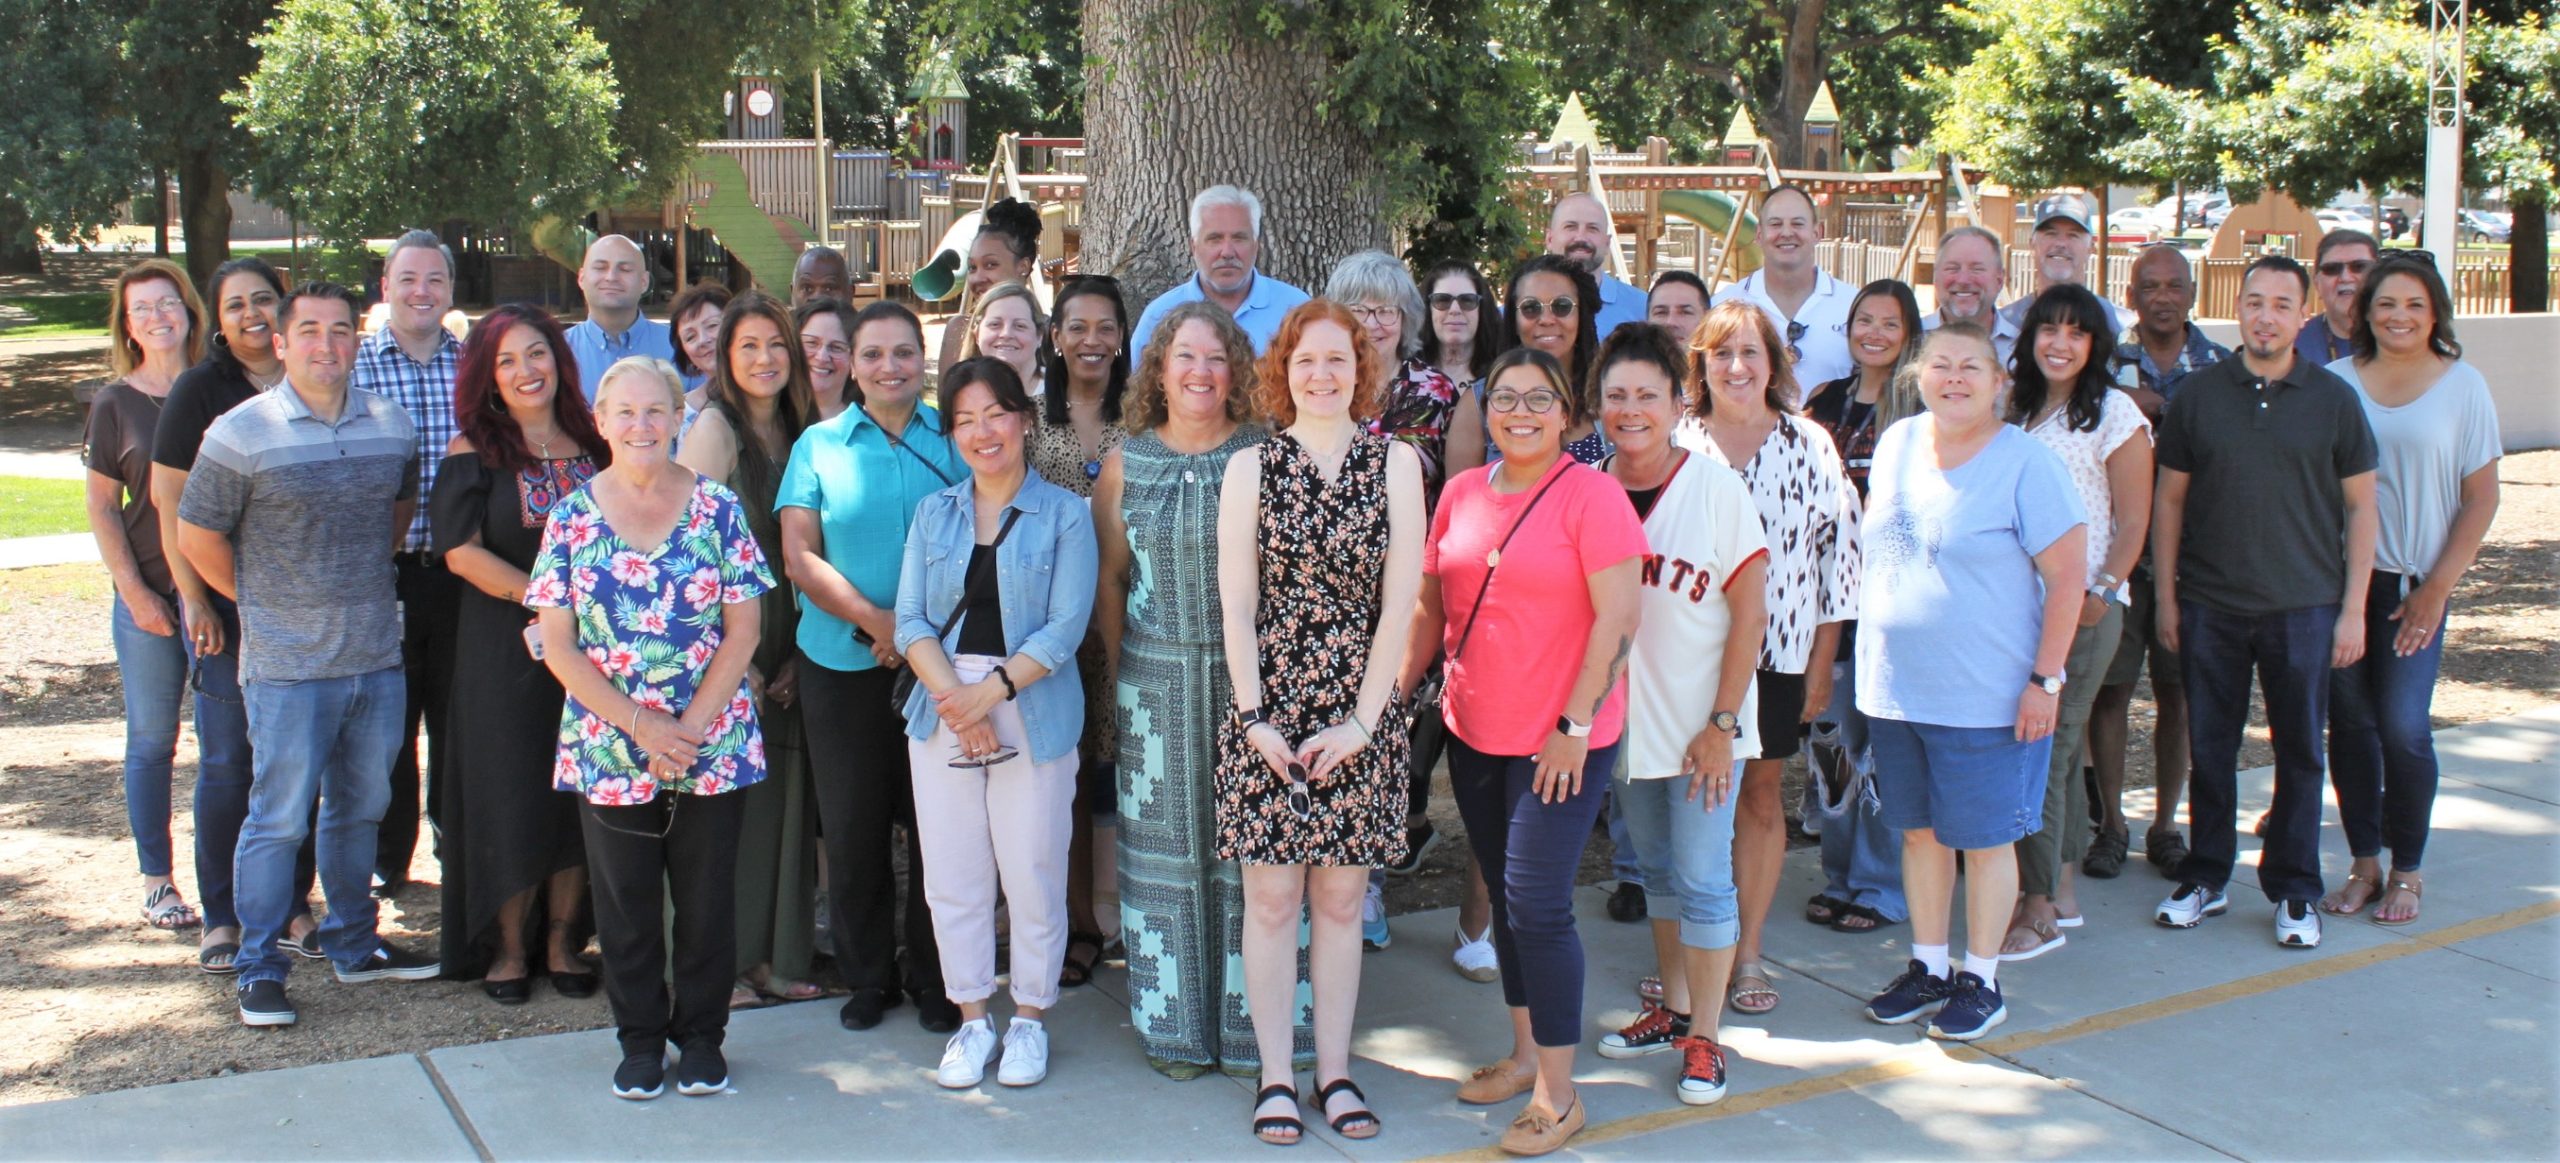 Current and former staff stand under a tree to pose for a group photo.